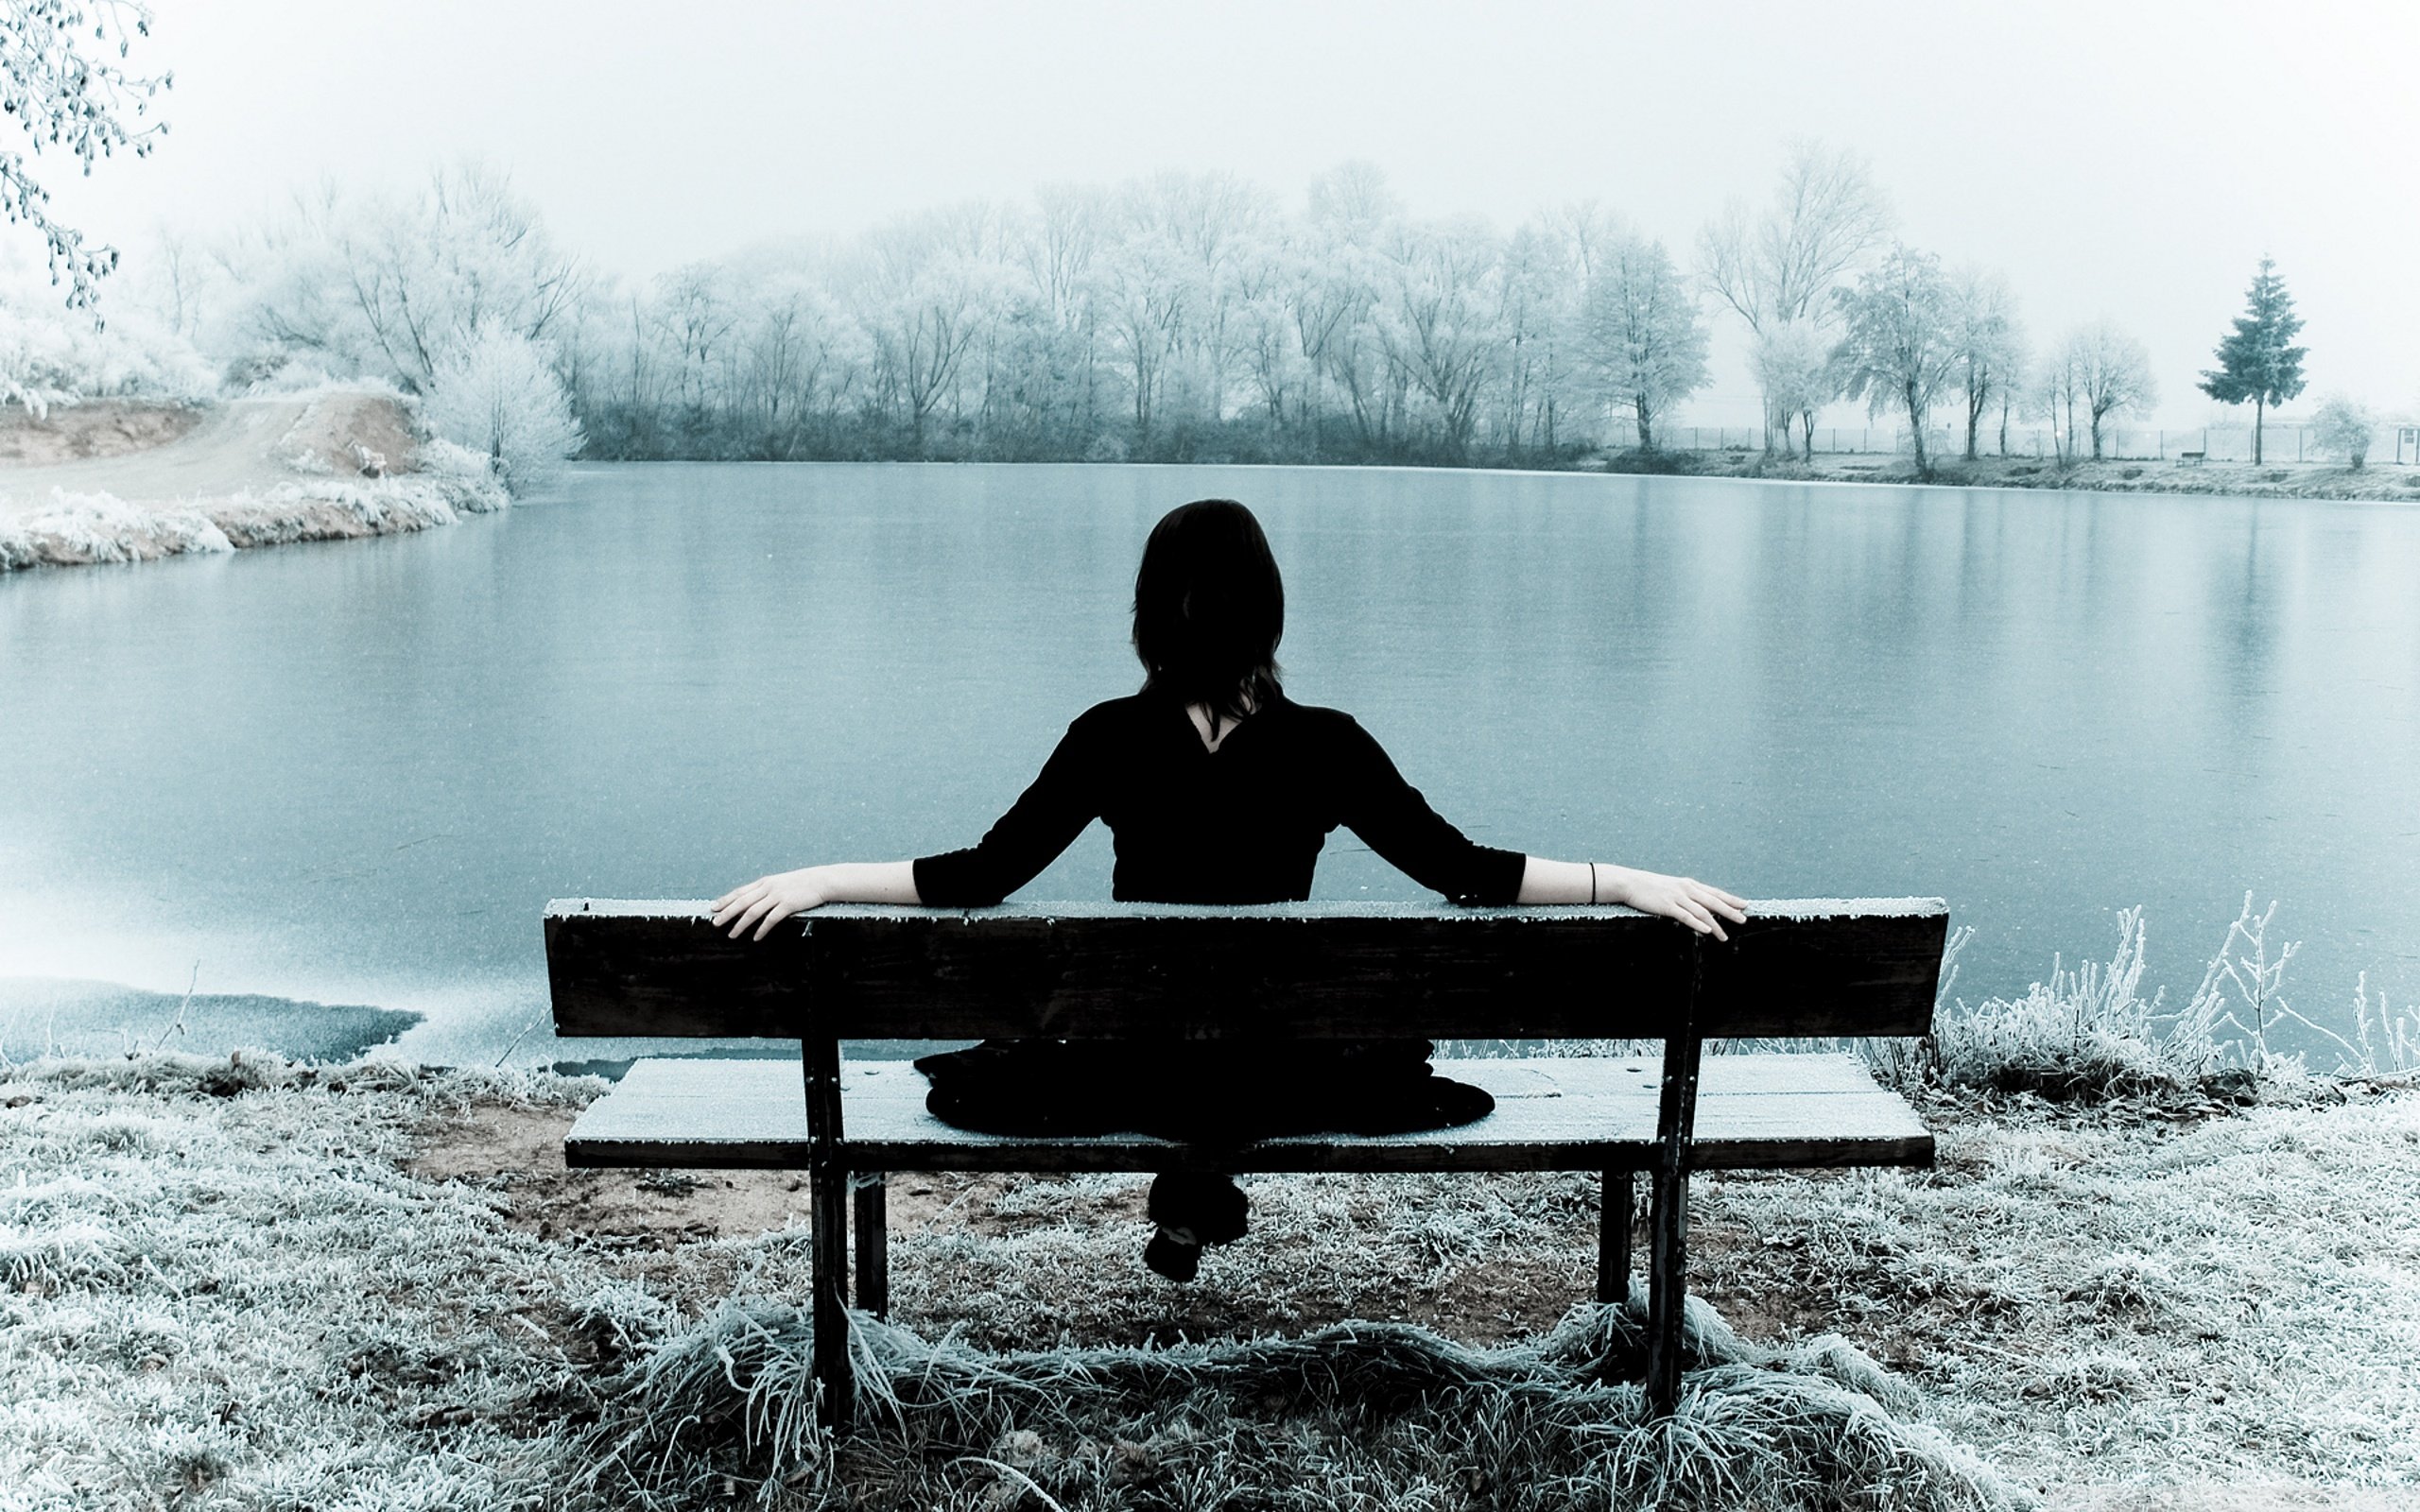 Photo about Back view of young woman sitting on a bench and sketch of a young man. Divorce and meeting concept. Image of feeling, heartbroken.